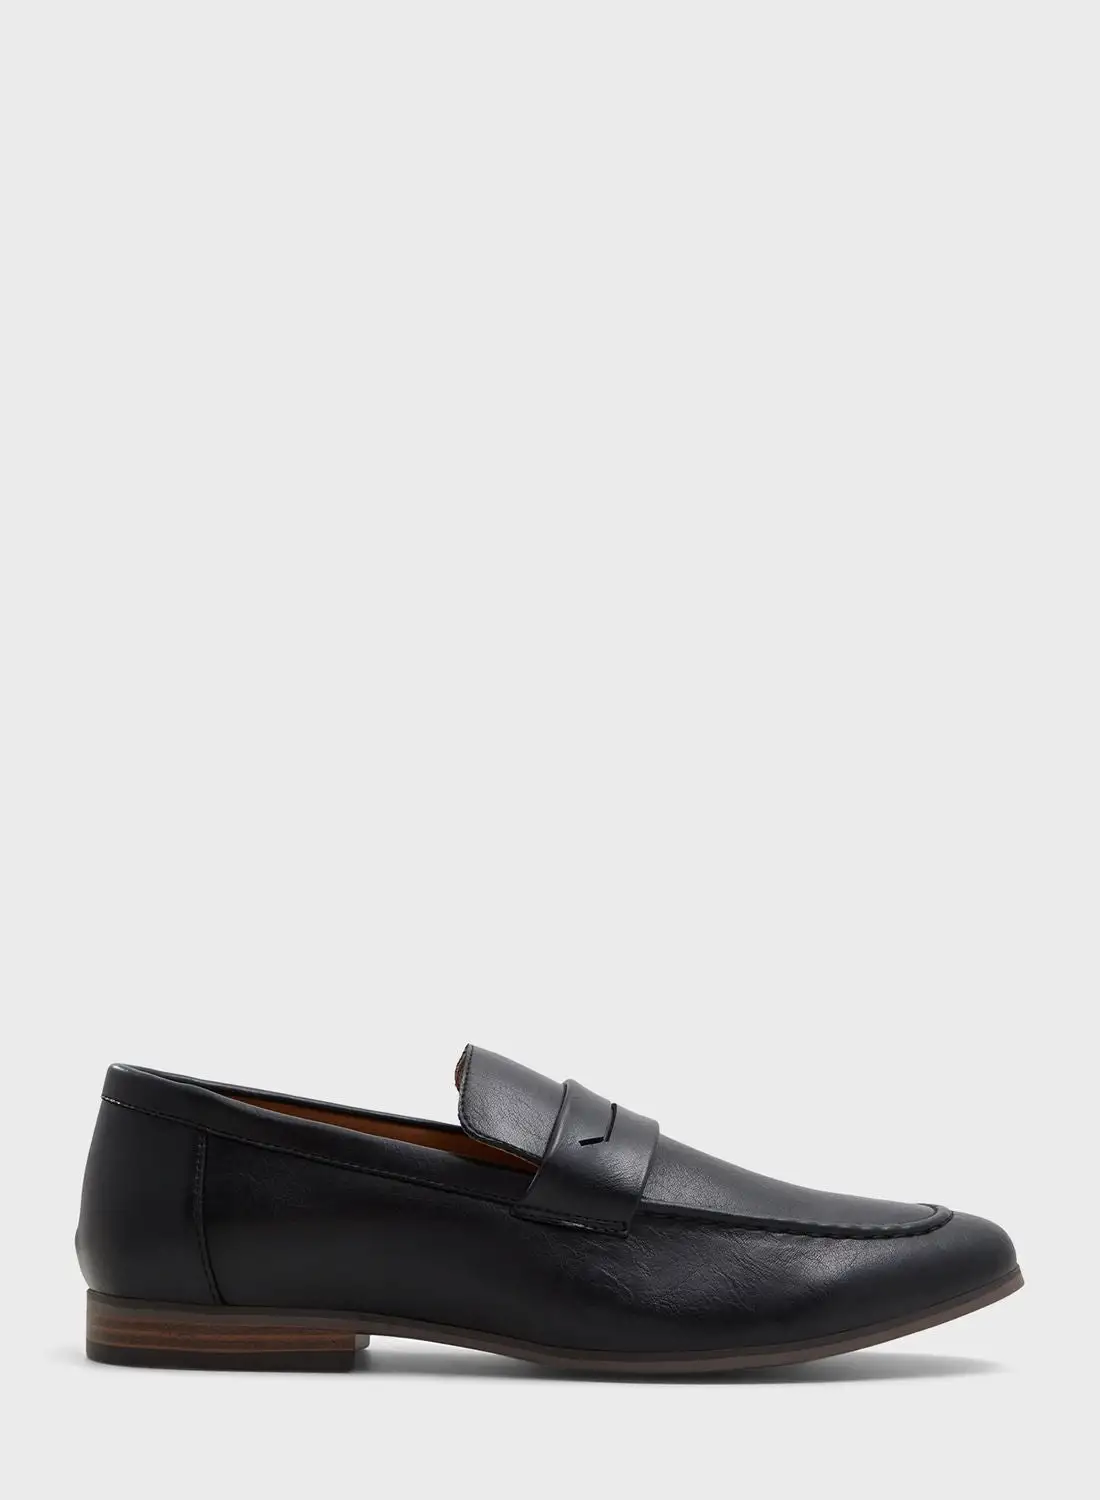 CALL IT SPRING Formal Slip On Loafers